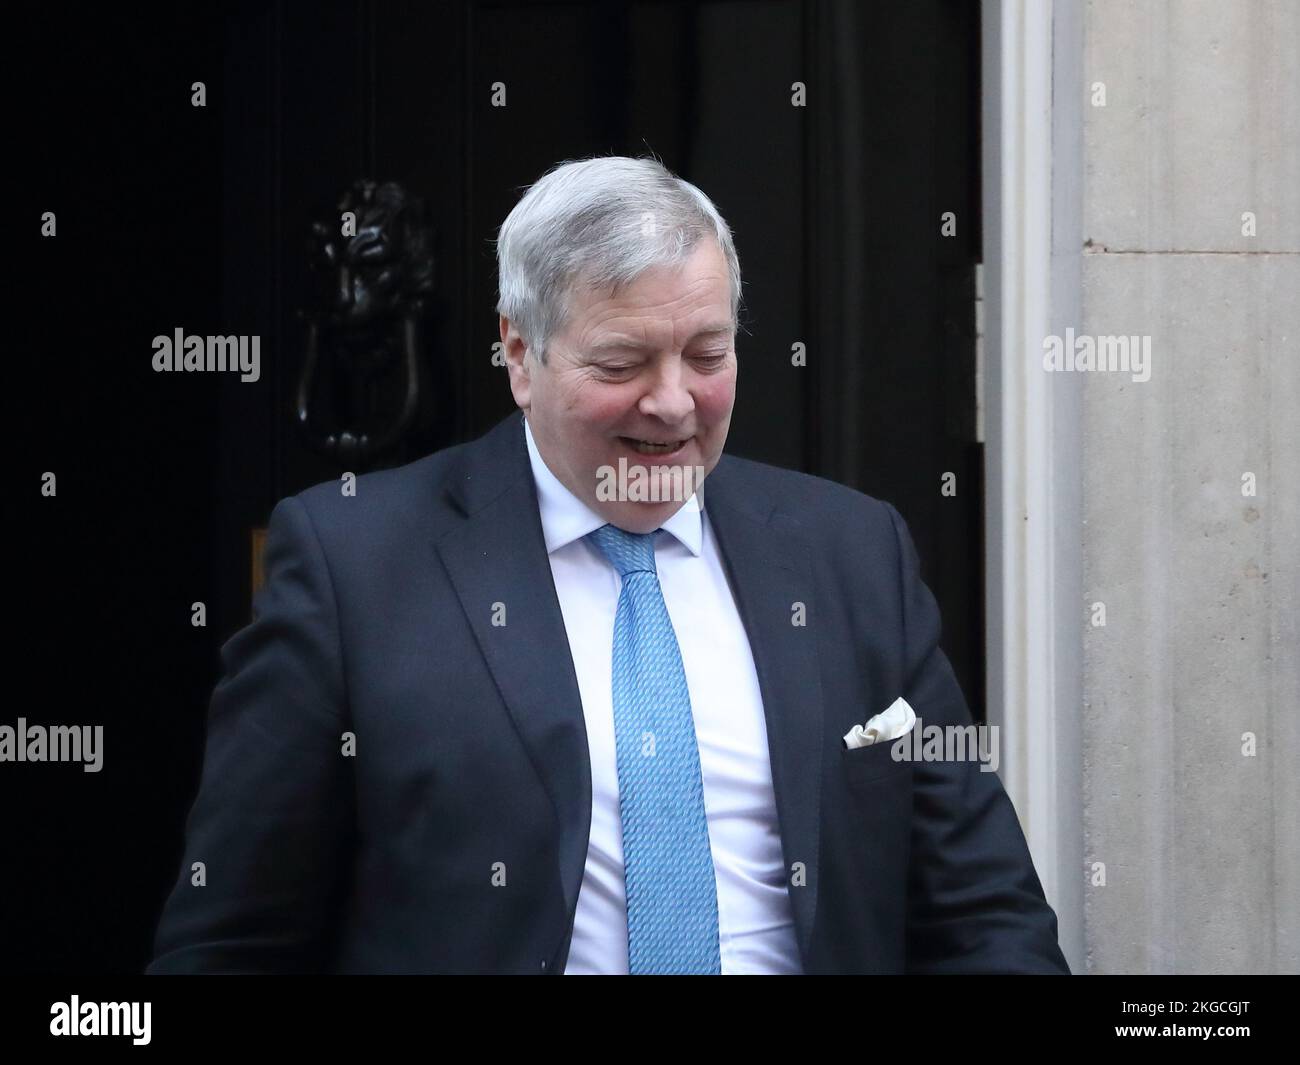 Downing Street, London, UK. 22nd November 2022. Leader of the House of Lords Lord True leaves after the Cabinet Meeting at No 10 Downing Street. Stock Photo